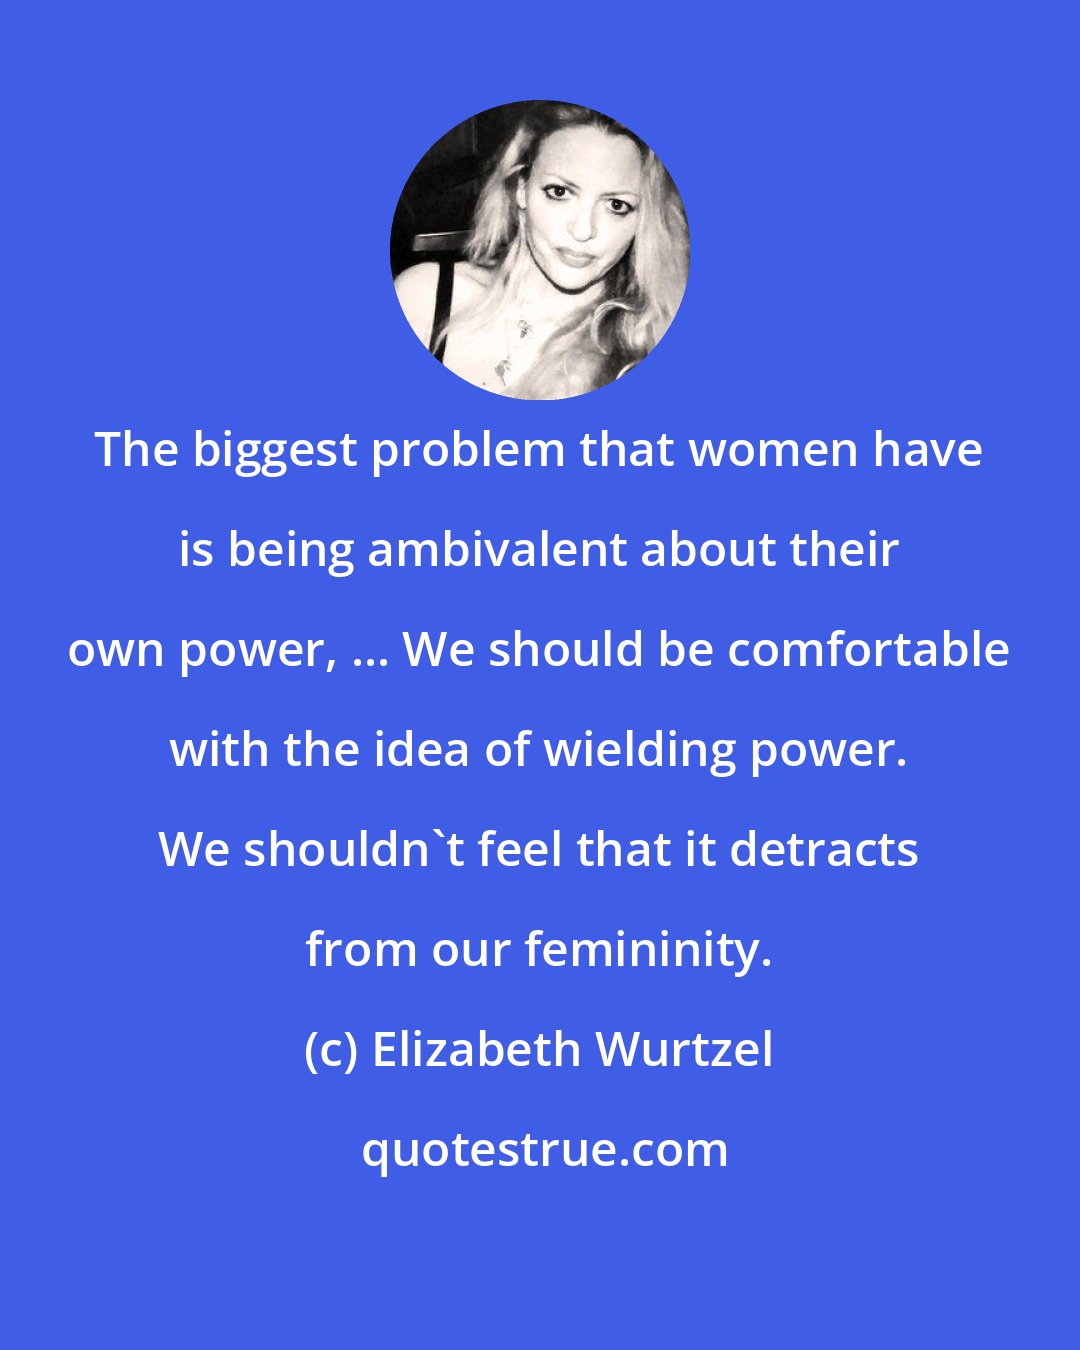 Elizabeth Wurtzel: The biggest problem that women have is being ambivalent about their own power, ... We should be comfortable with the idea of wielding power. We shouldn't feel that it detracts from our femininity.